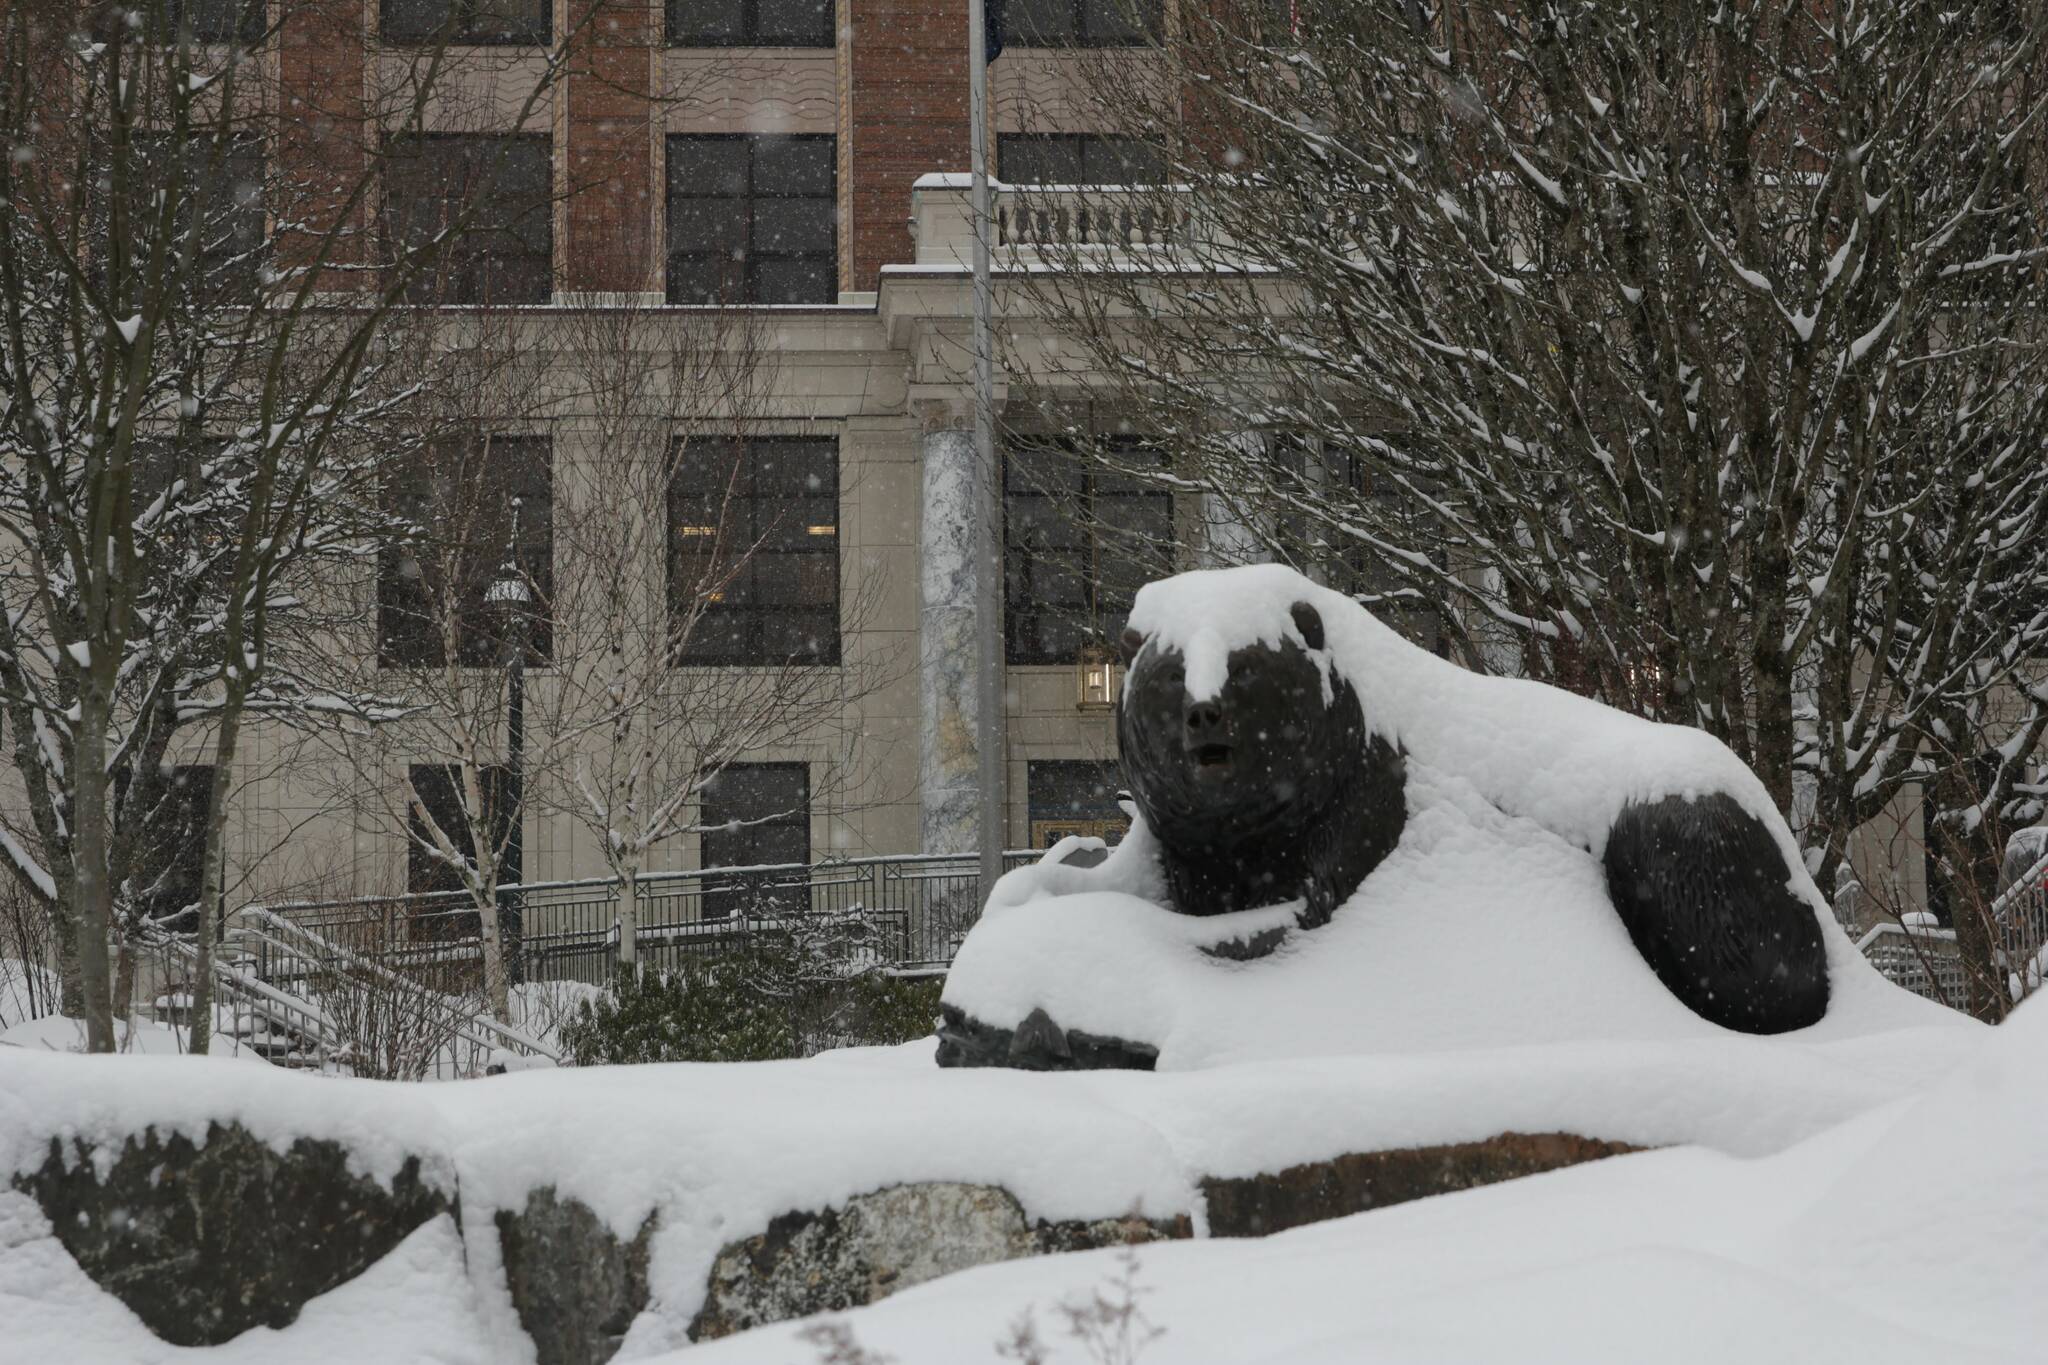 Snow blankets a statue in front of the Alaska State Capitol. (Michael S. Lockett / Juneau Empire File)